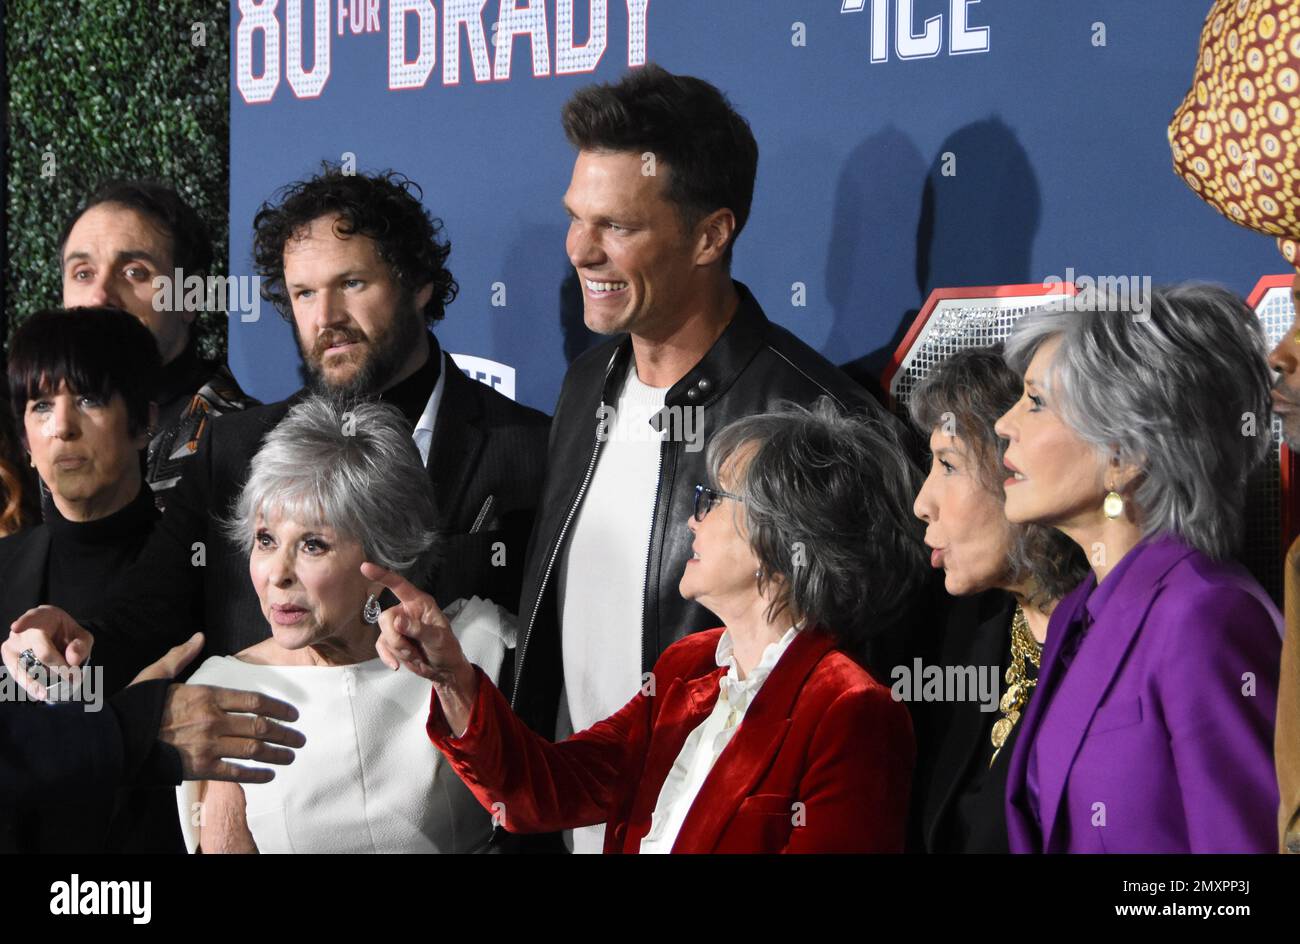 Los Angeles, California, USA 31st January 2023 (L-R) Songwriter Diane Warren, Director Kyle Marvin, Actress Rita Morena, Football Player Tom Brady, Actress Sally Field, Actress Lily Tomlin and Actress Jane Fonda attend the Los Angeles Premiere Screening of Paramount Pictures' '80 for Brady' at Regency Village Theatre on January 31, 2023 in Los Angeles, California, USA. Photo by Barry King/Alamy Stock Photo Stock Photo